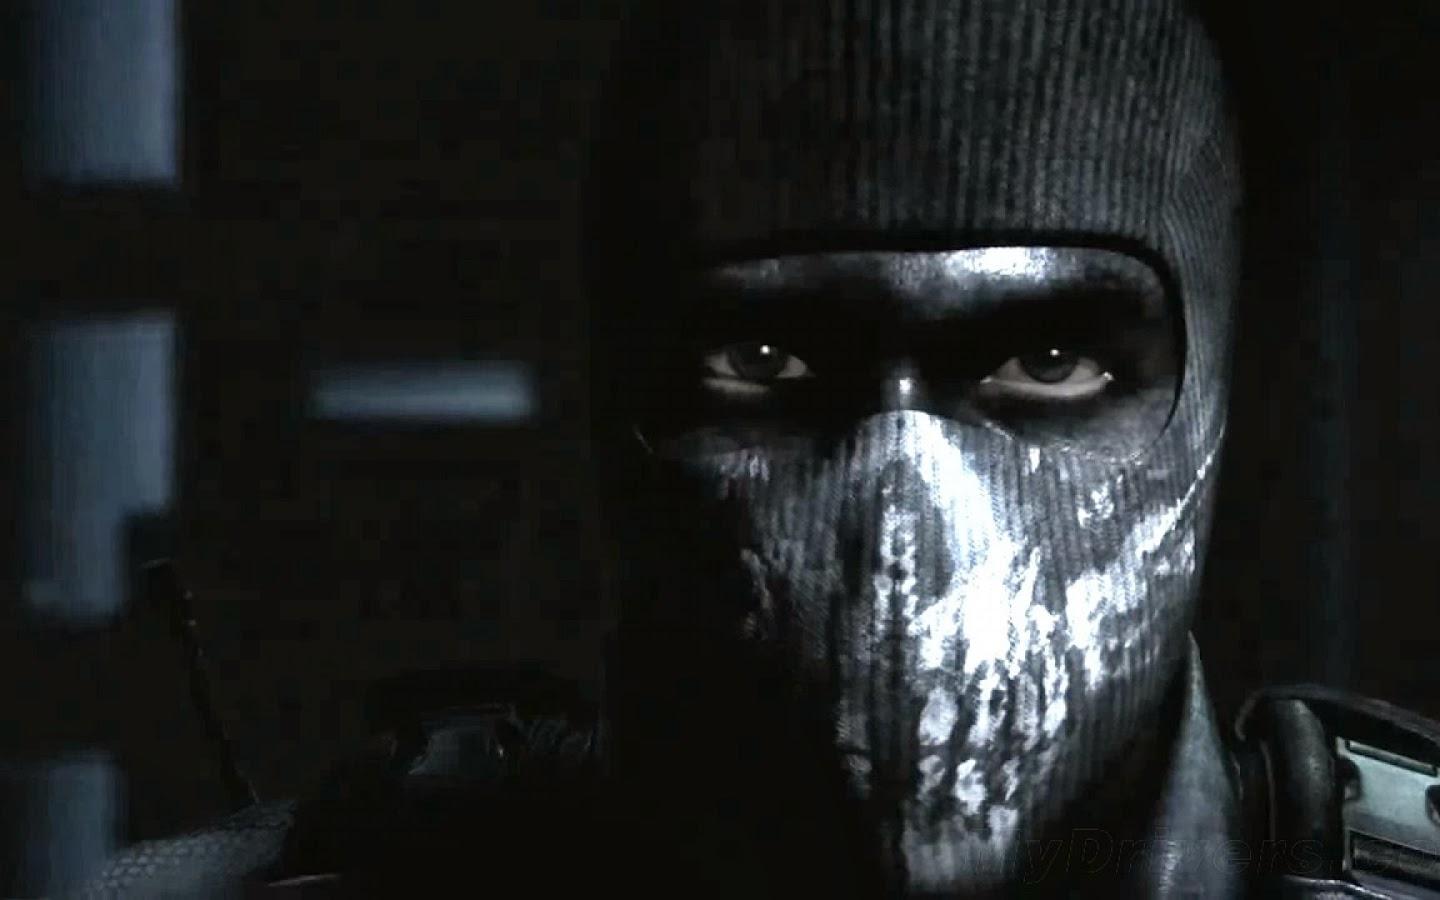 584114 1920x1080 call of duty call of duty ghosts wallpaper JPG 637 kB   Rare Gallery HD Wallpapers